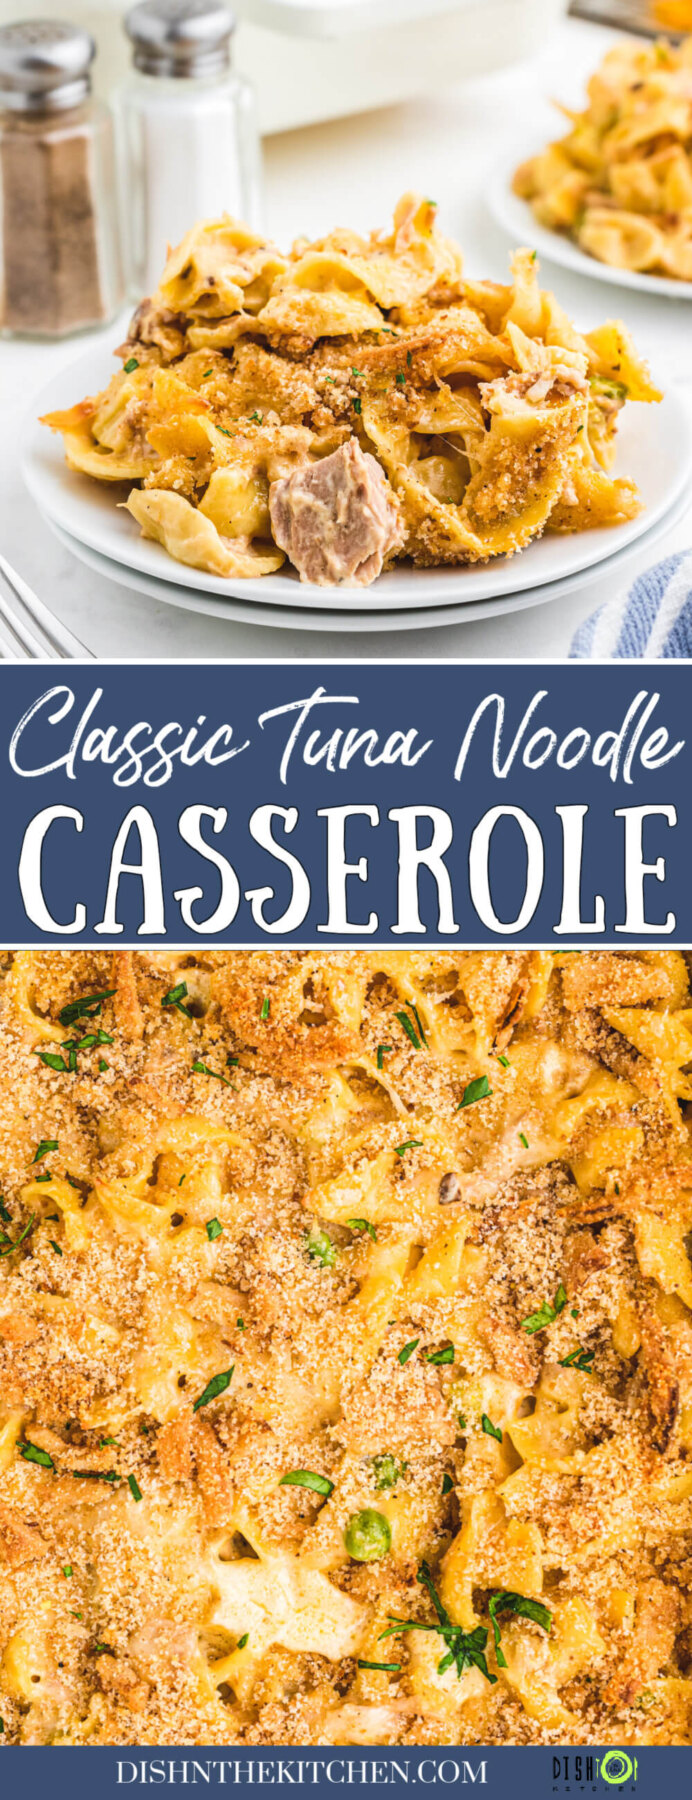 Pinterest image featuring a white enamel baking pan and a serving plate filled with golden baked, crumb topped Tuna Noodle Casserole.